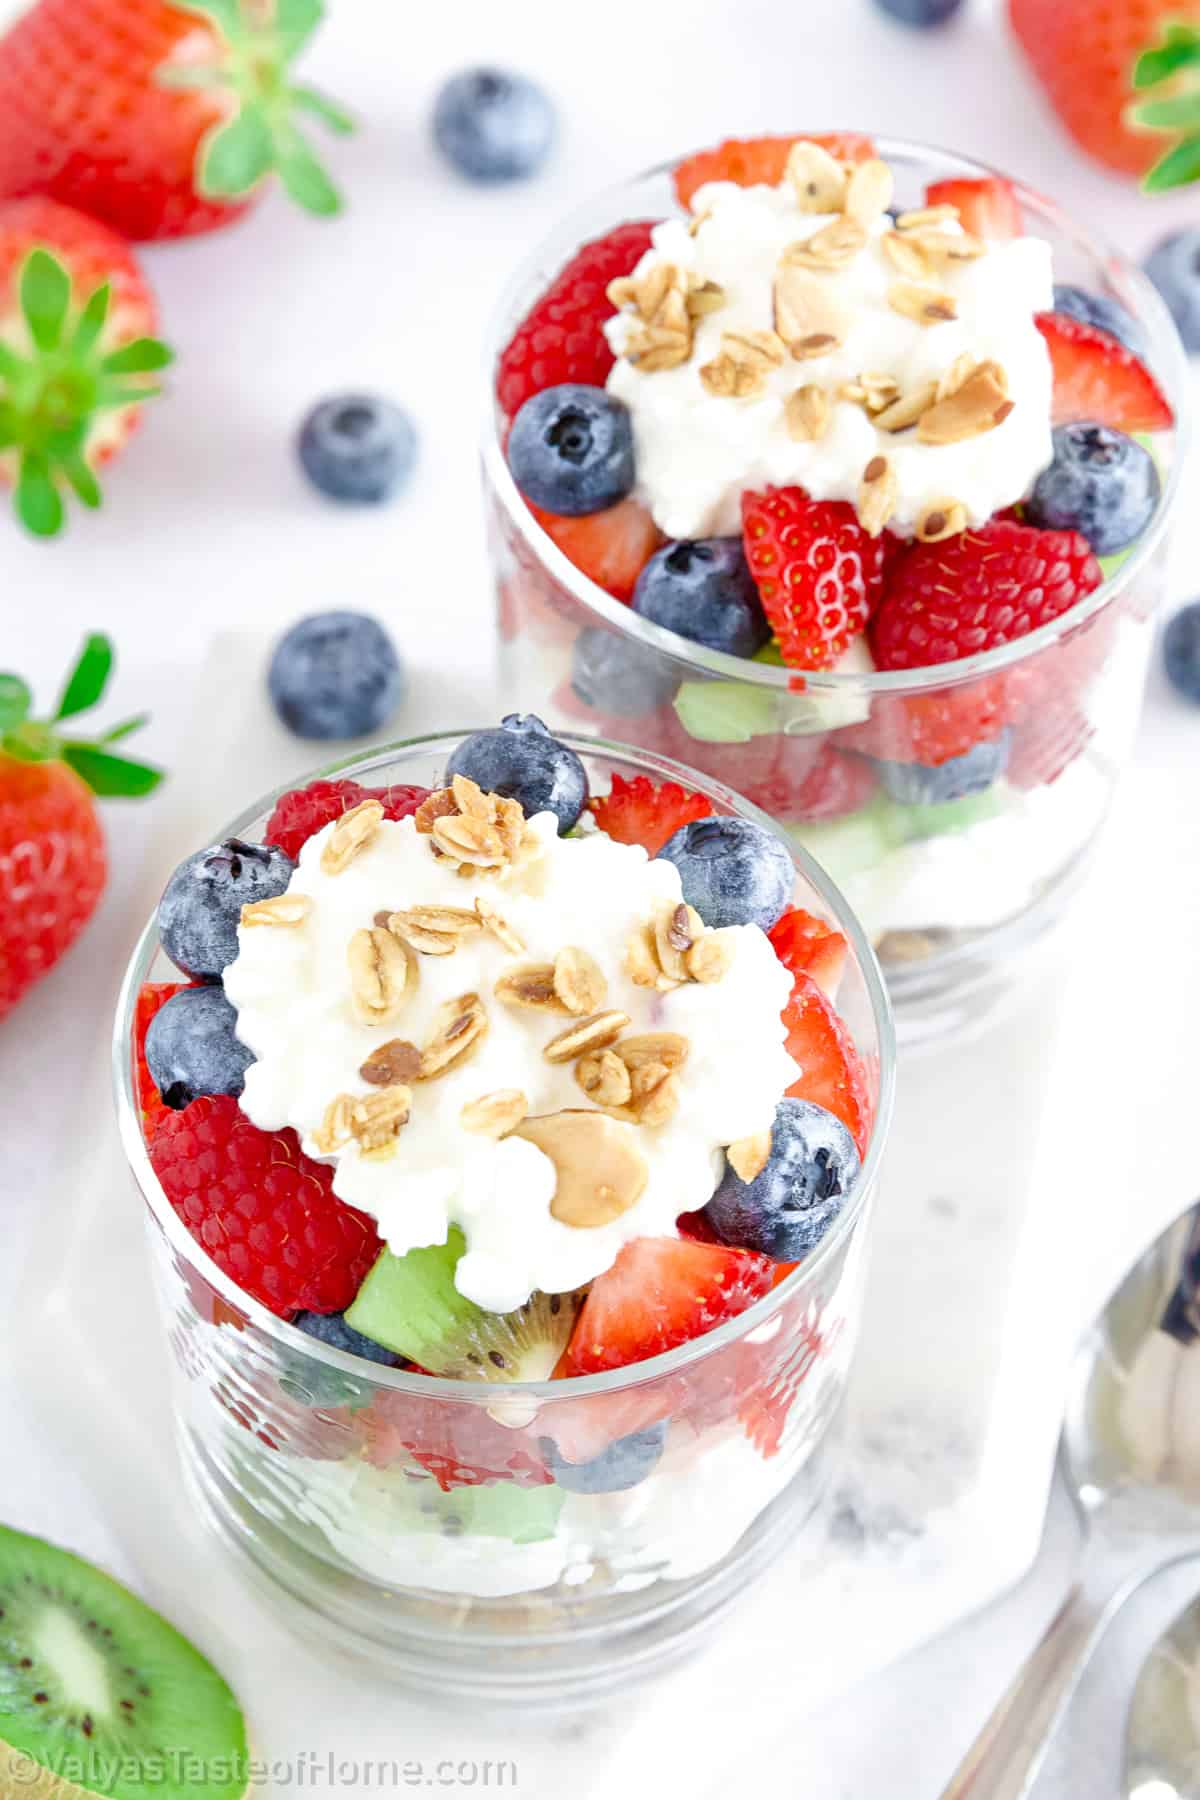 Now, your delicious and healthy cottage cheese parfait is ready to be enjoyed! 